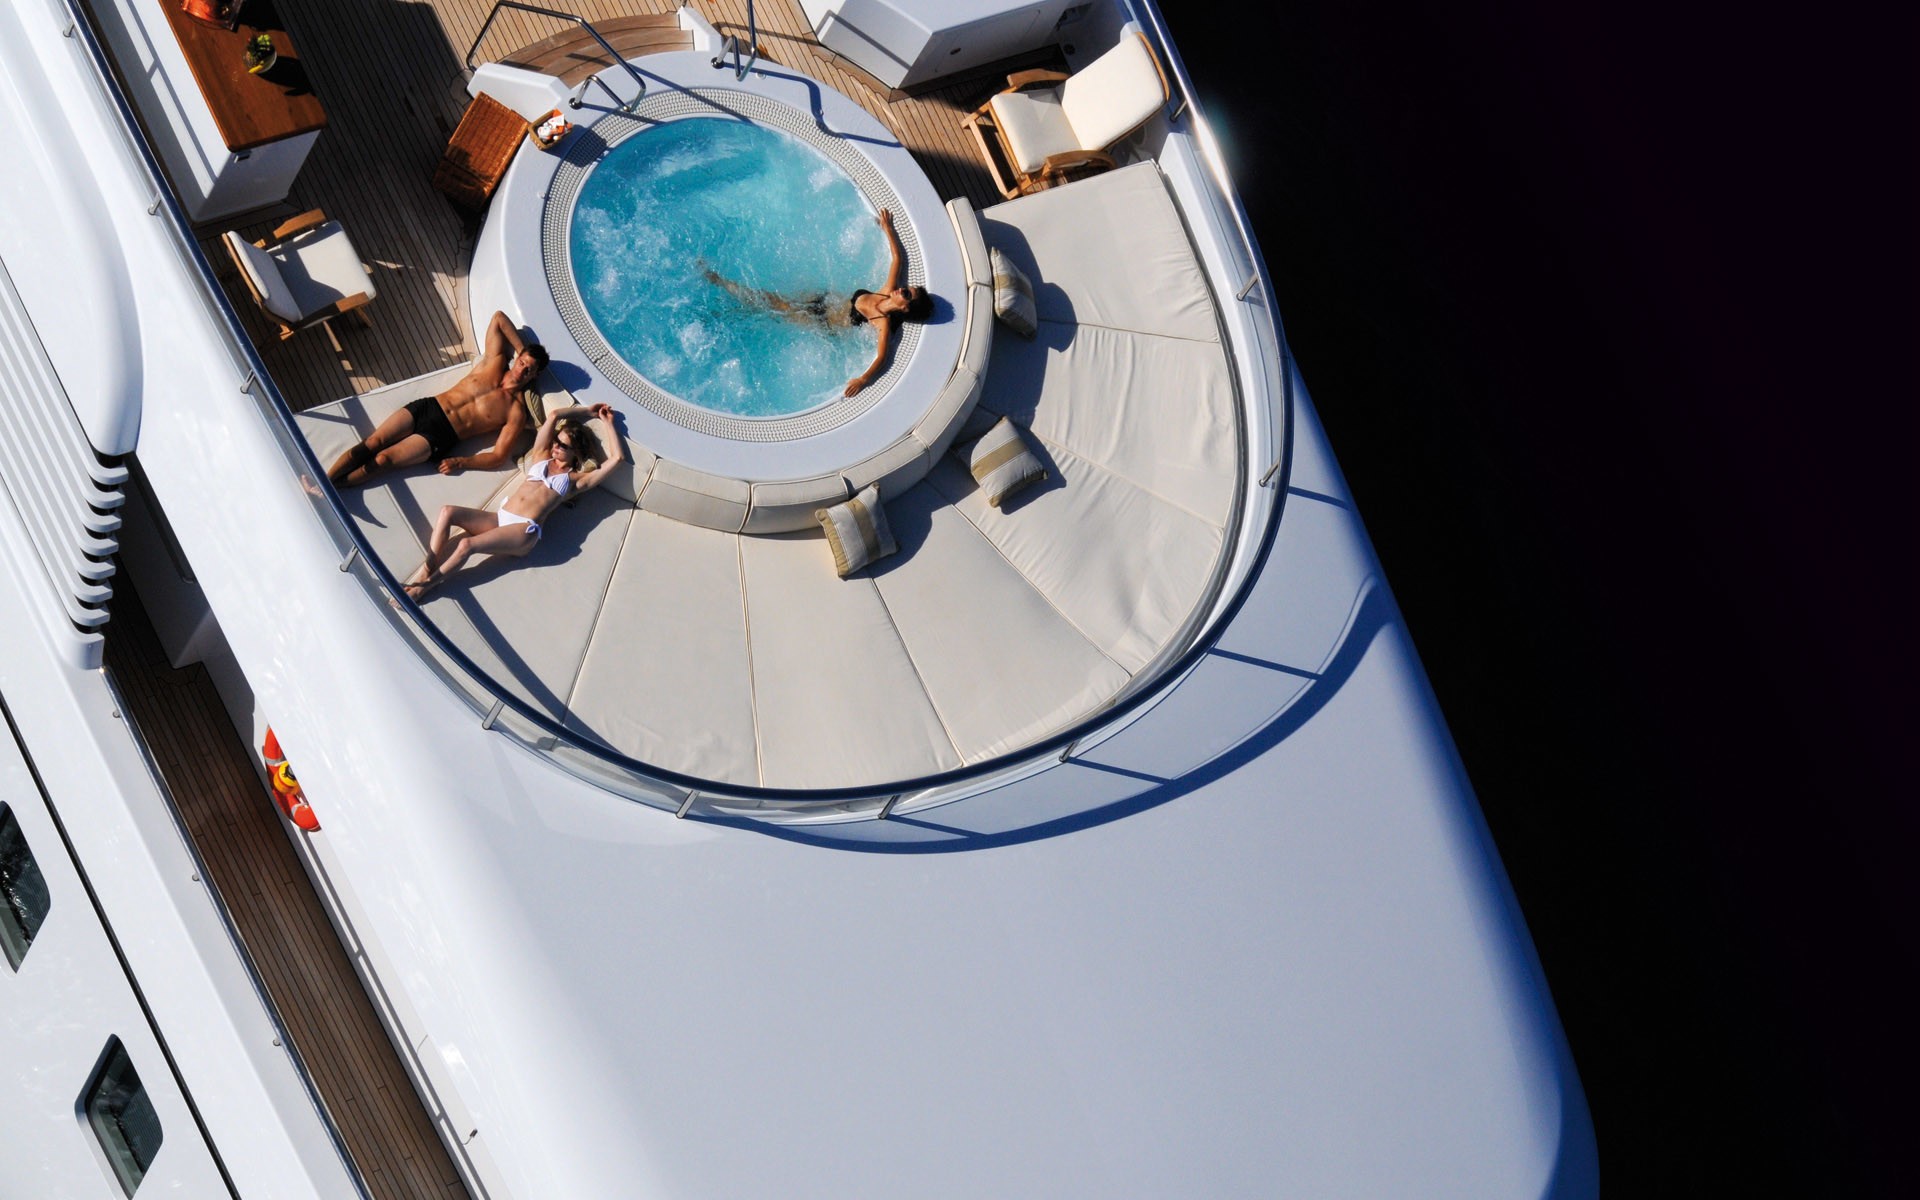 Jacuzzi Pool: Yacht HARLE's From Above Aspect Pictured